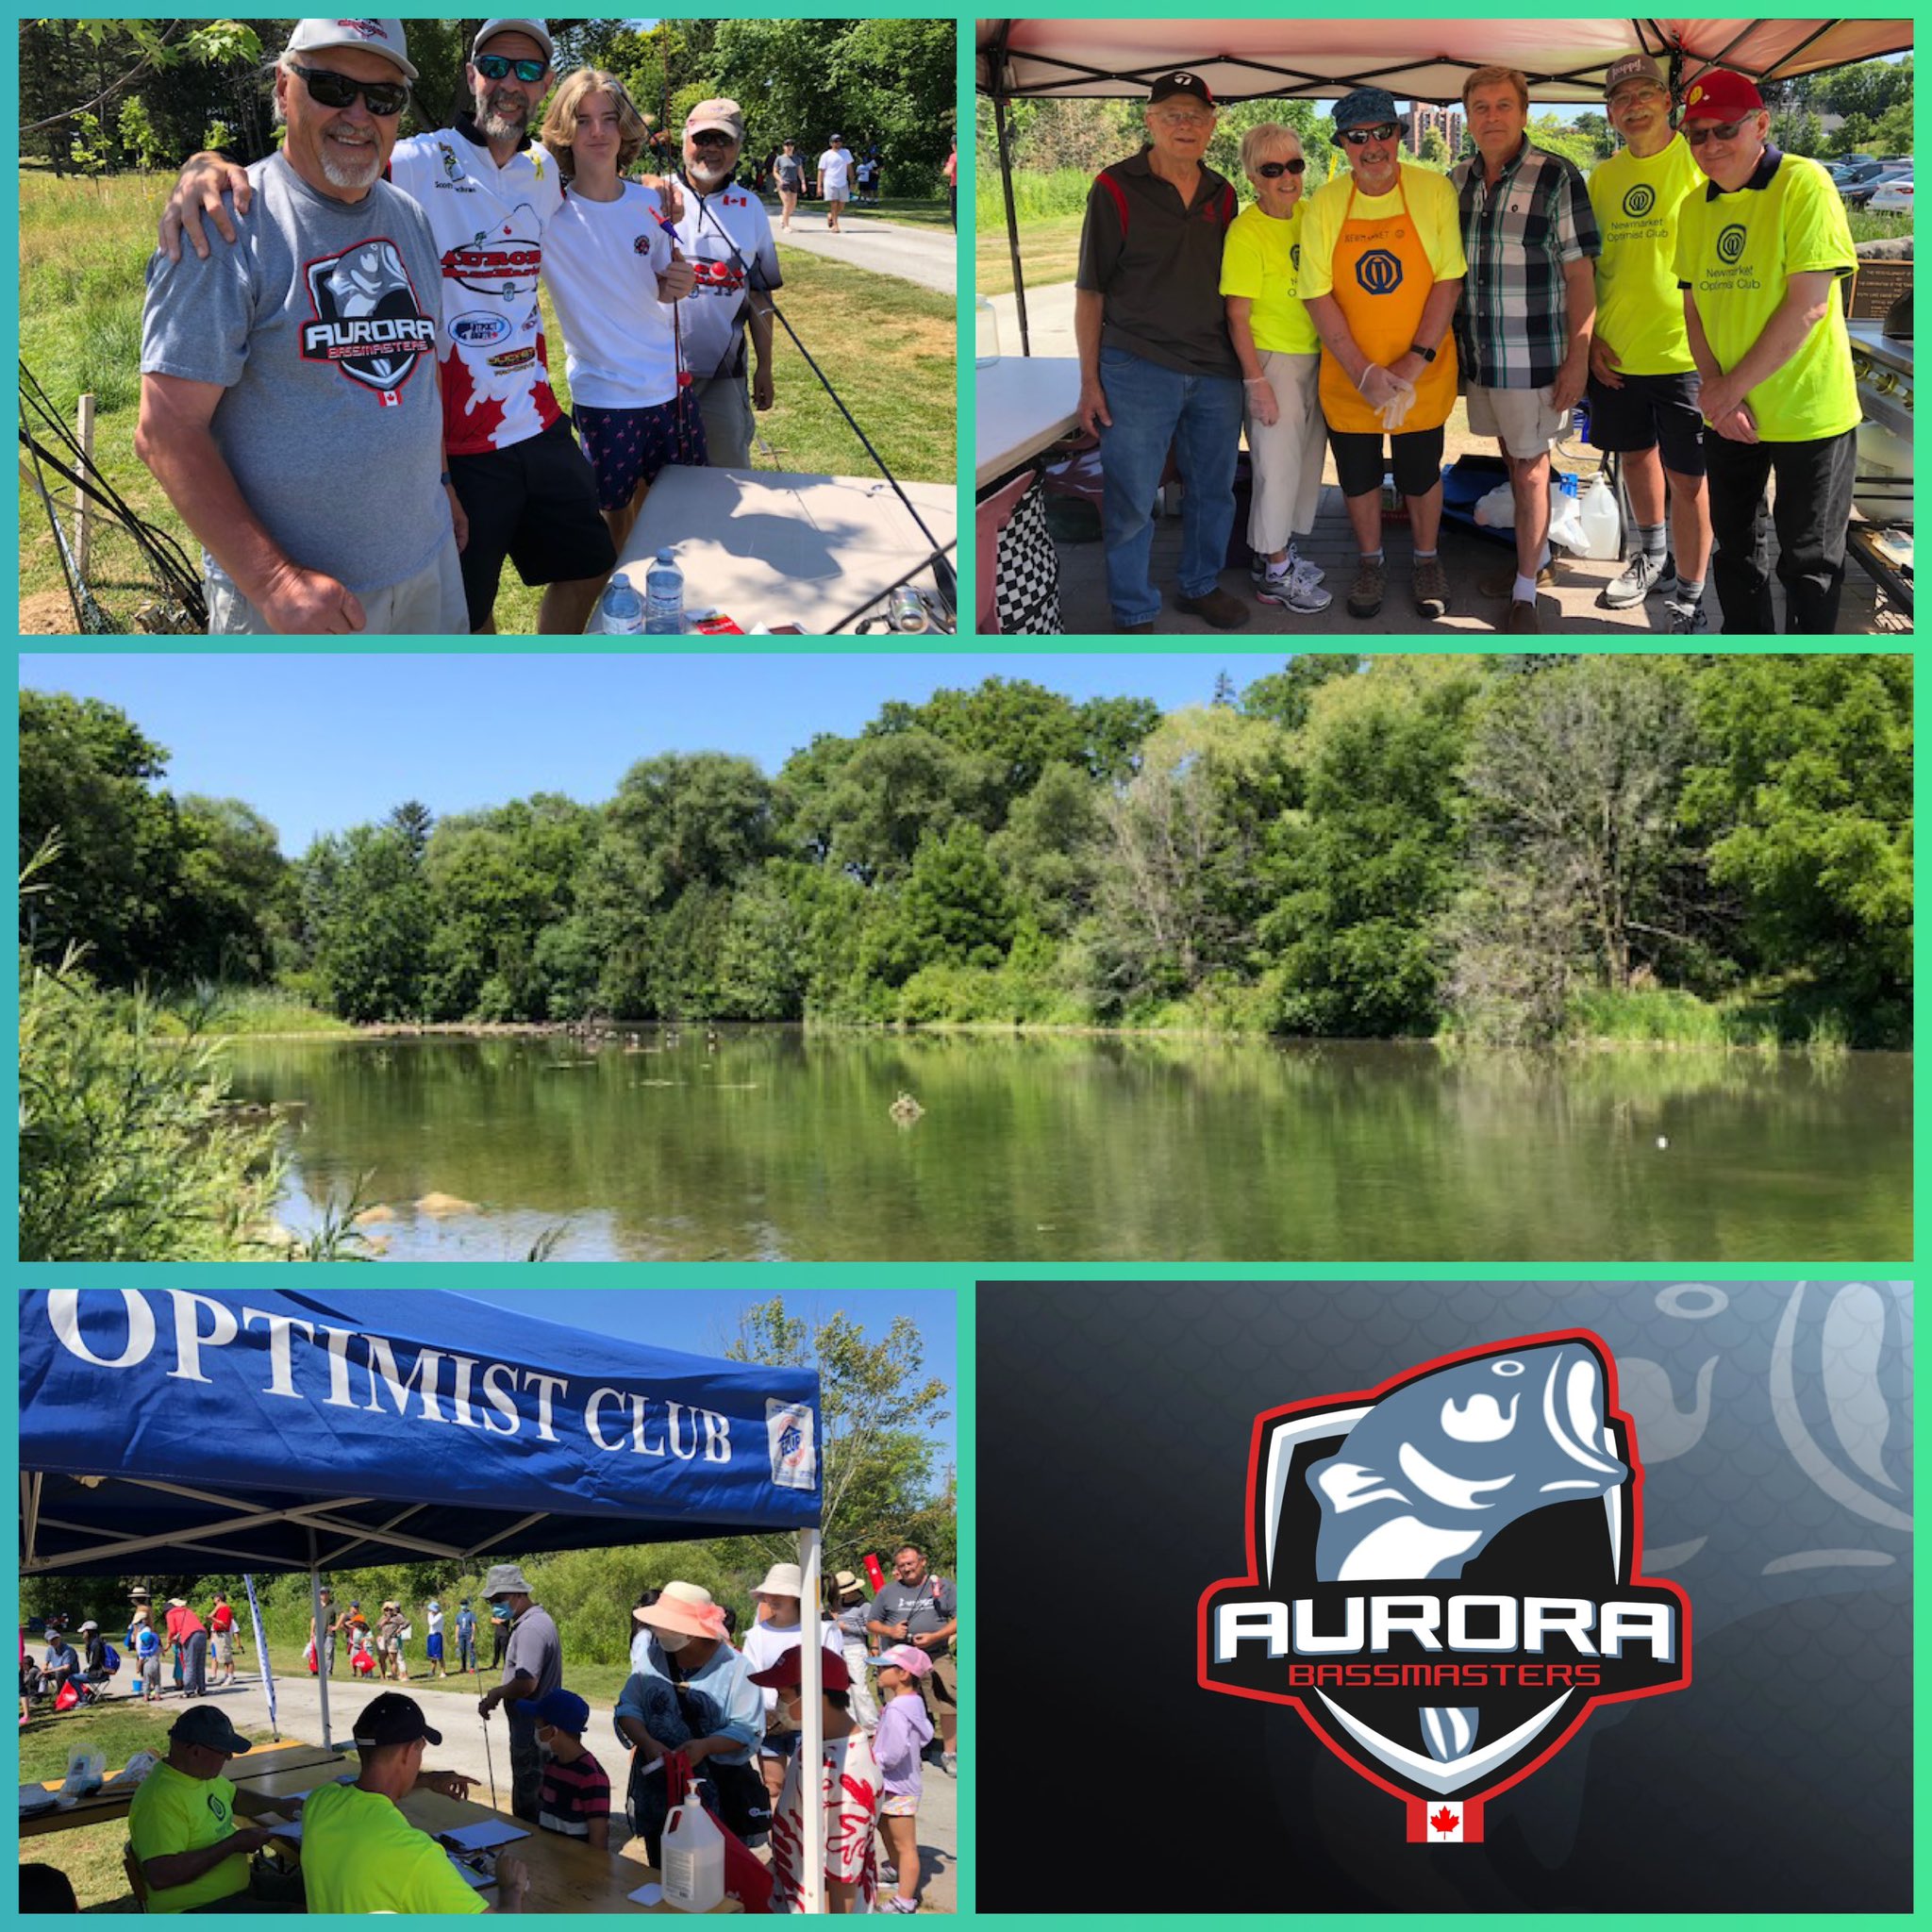 Tom Vegh on X: Thank you to the Newmarket Optimist Club and the Aurora  Bass Masters for hosting the Family Fishing Day at Fairy Lake in Newmarket.  The Bass Masters loaned out